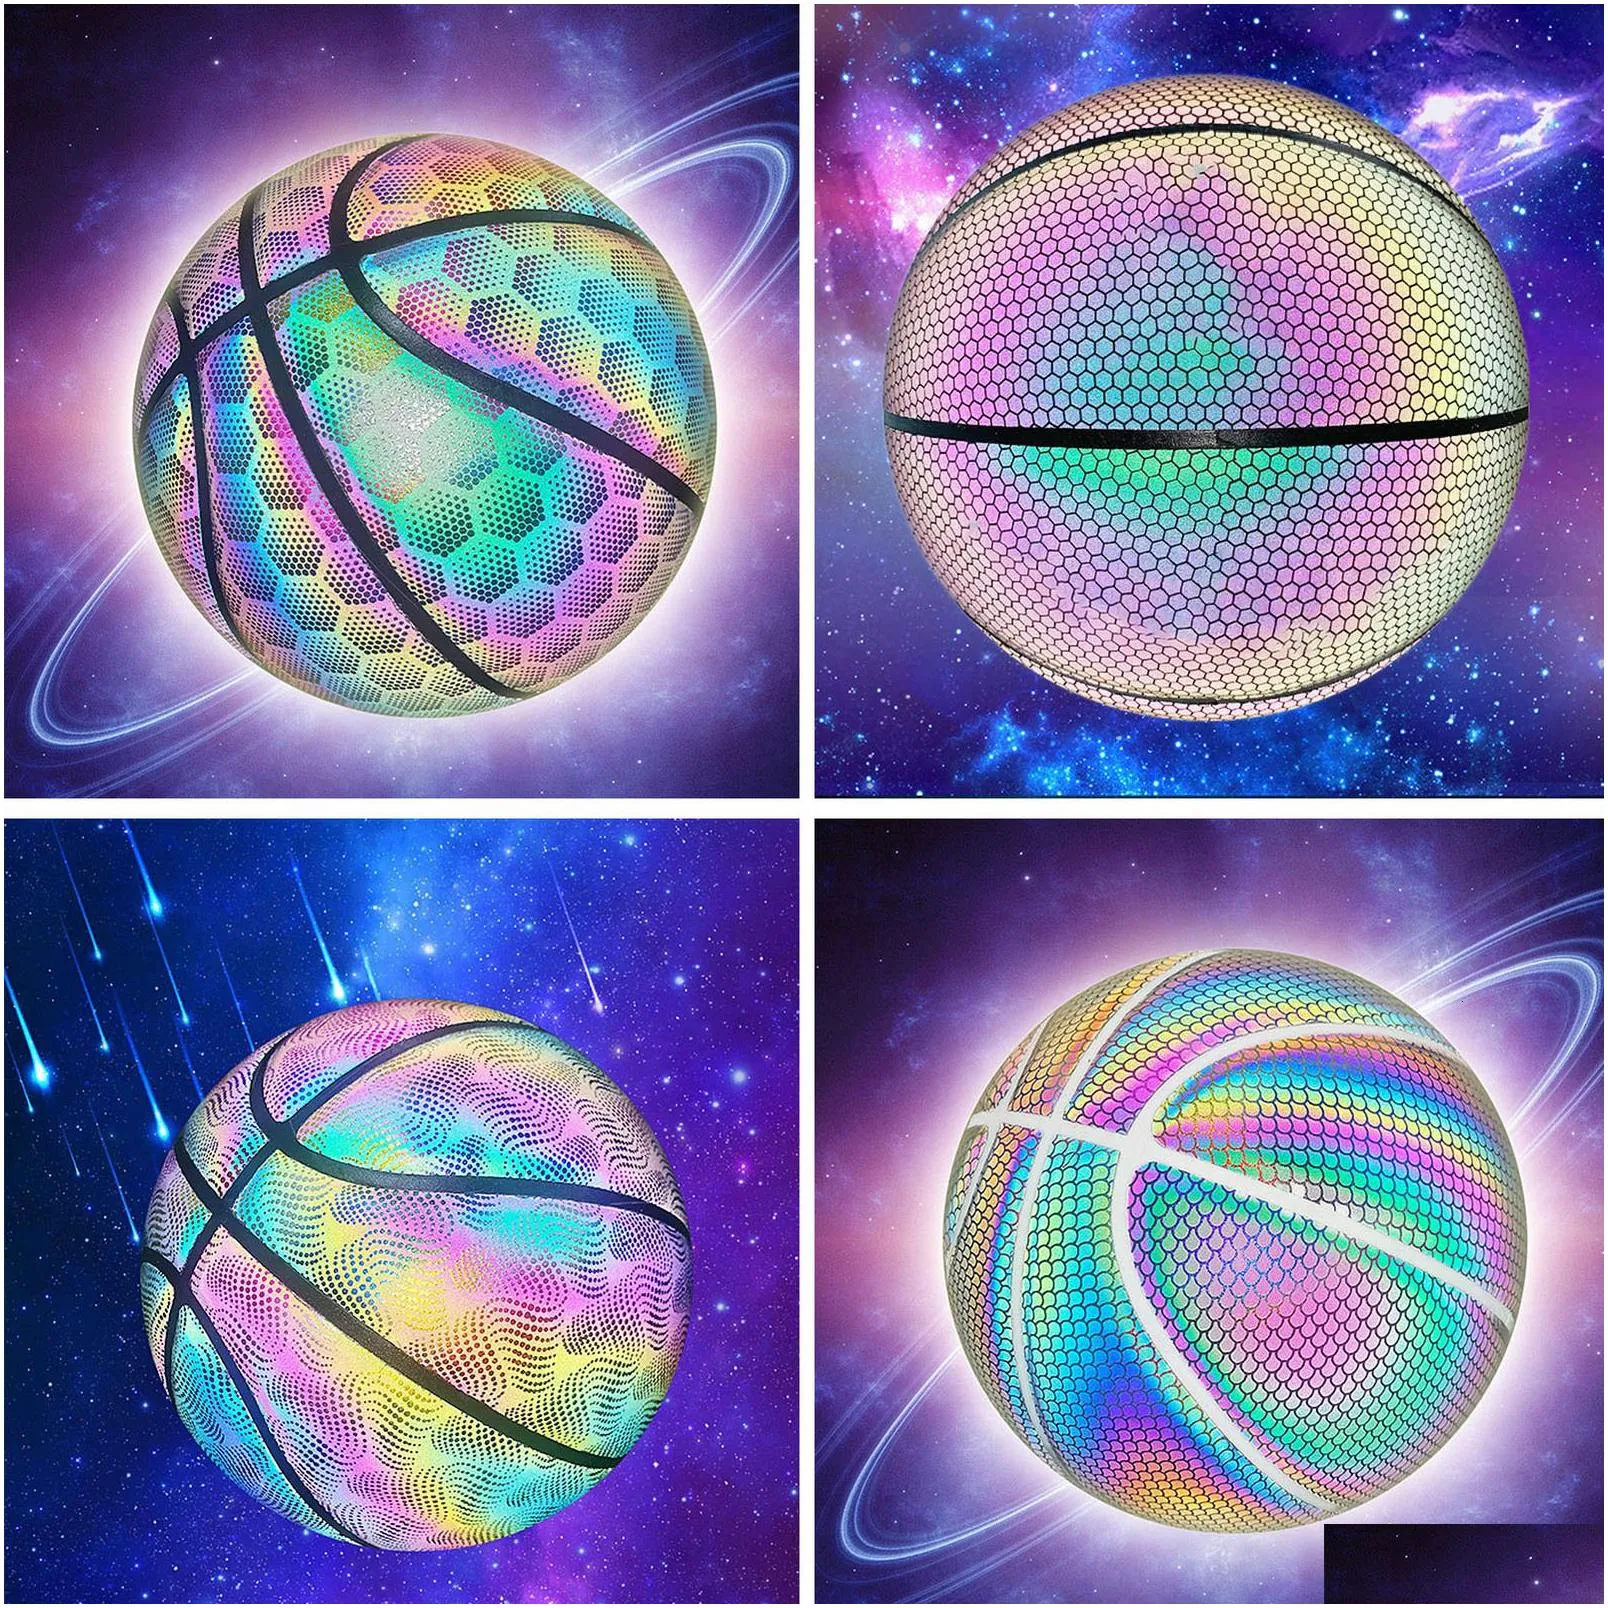 Novelty Games Novelty Games Luminous Basketball Ball Holographic Reflective Lighted Flash Pu Wear Resistant Glowing Night Sports Game Dhrx8